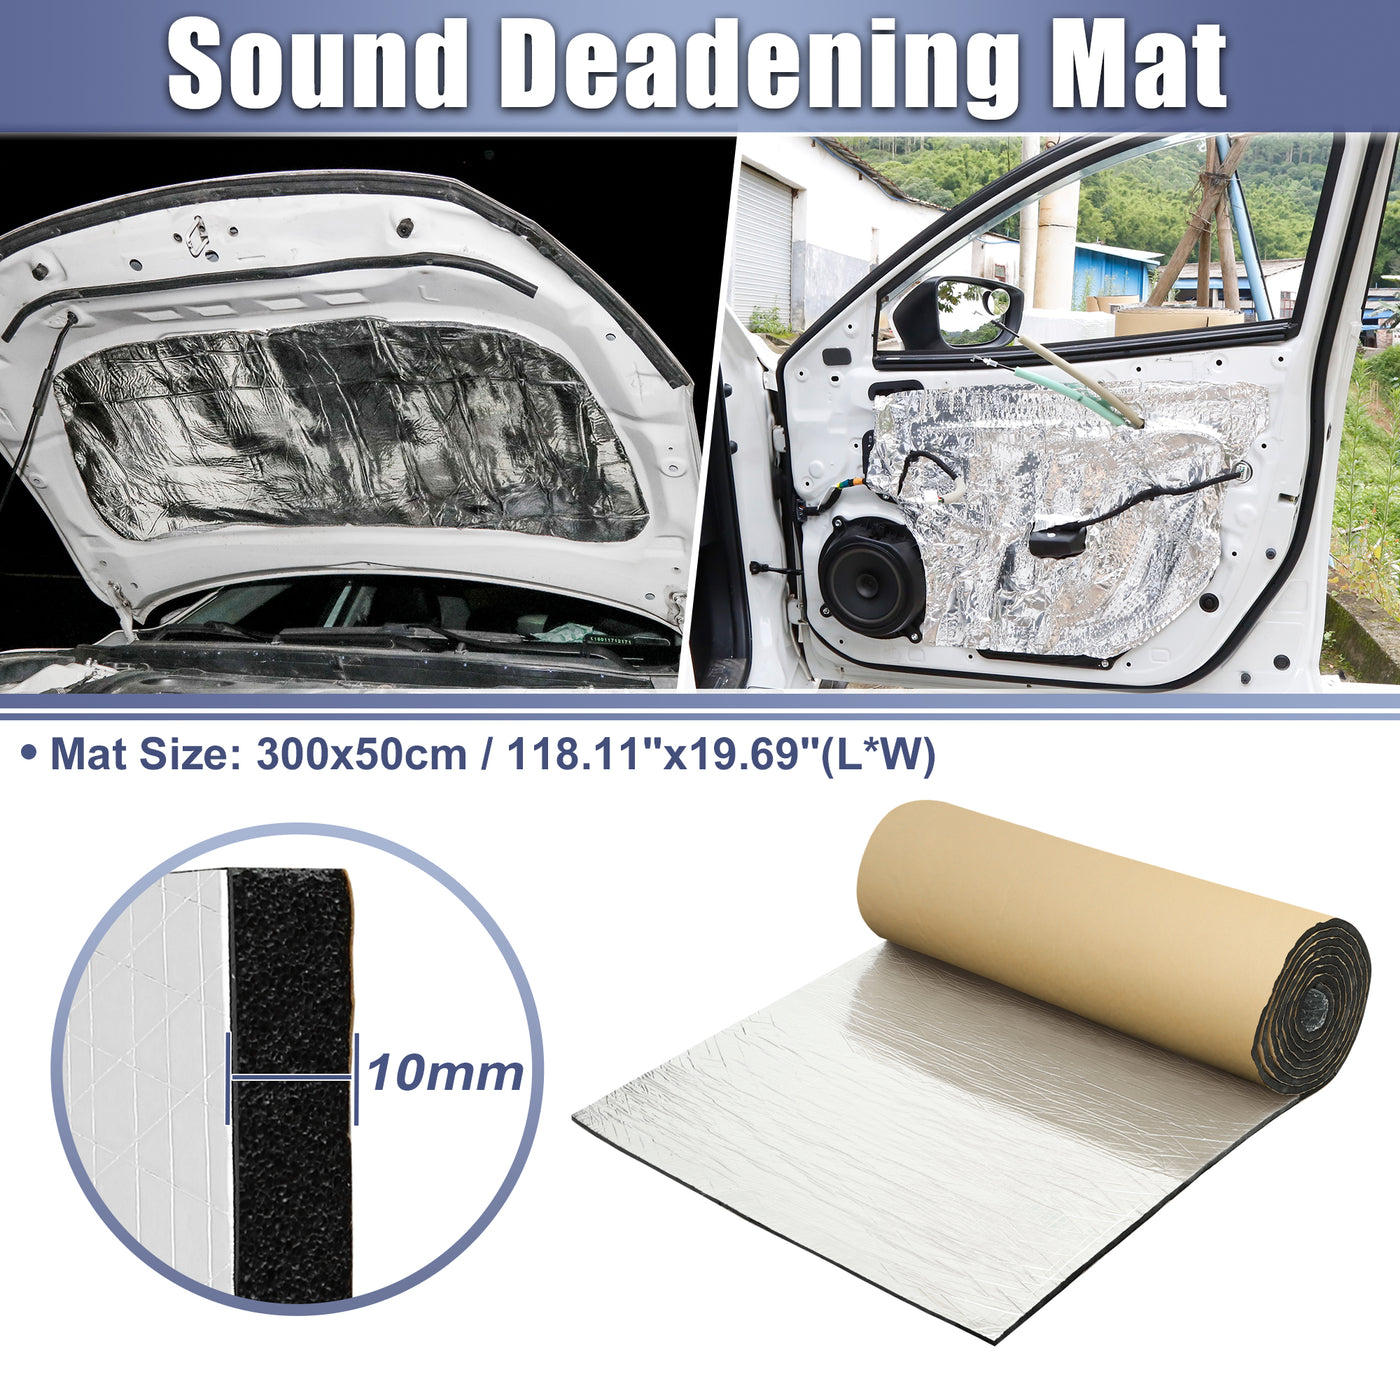 X AUTOHAUX 394mil 10mm 16.14sqft Car Sound Deadening Mat Aluminum Foil Closed Cell Foam Heat Shield Material Self Adhesive Universal for Hood Fender and Boat Engine Cover 118.11"x19.69"